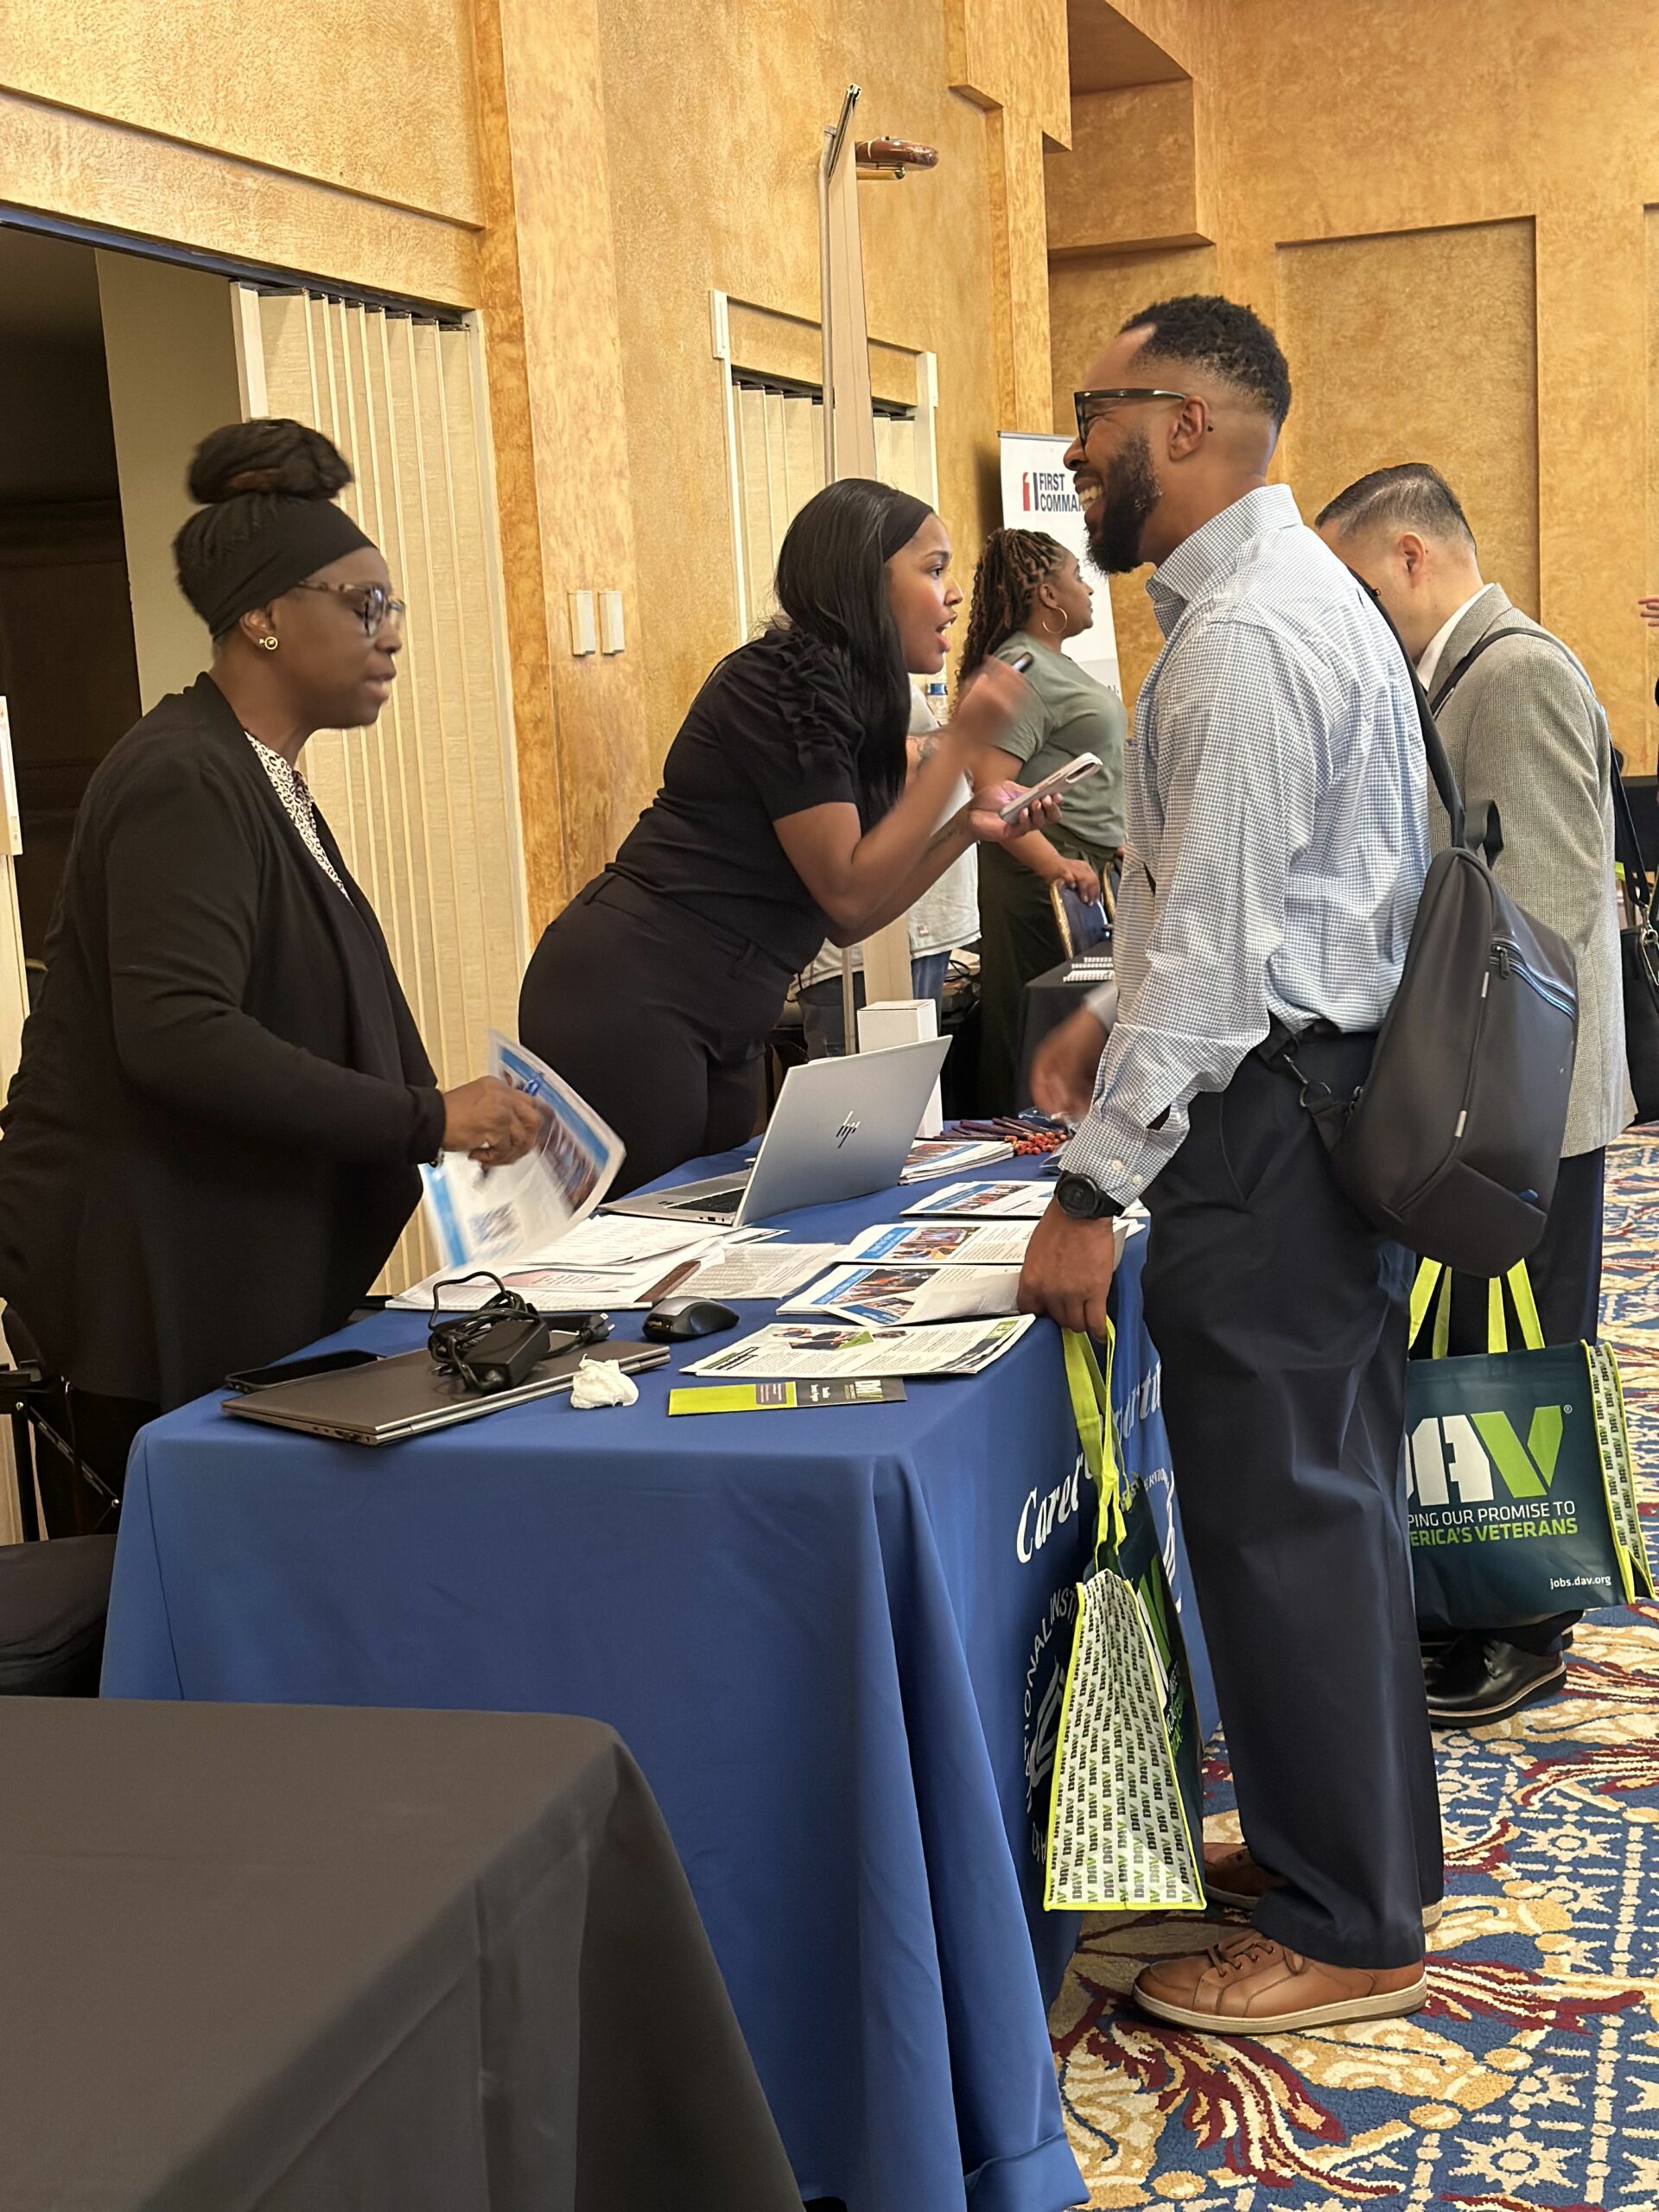 candidate interacting with employer in a career fair